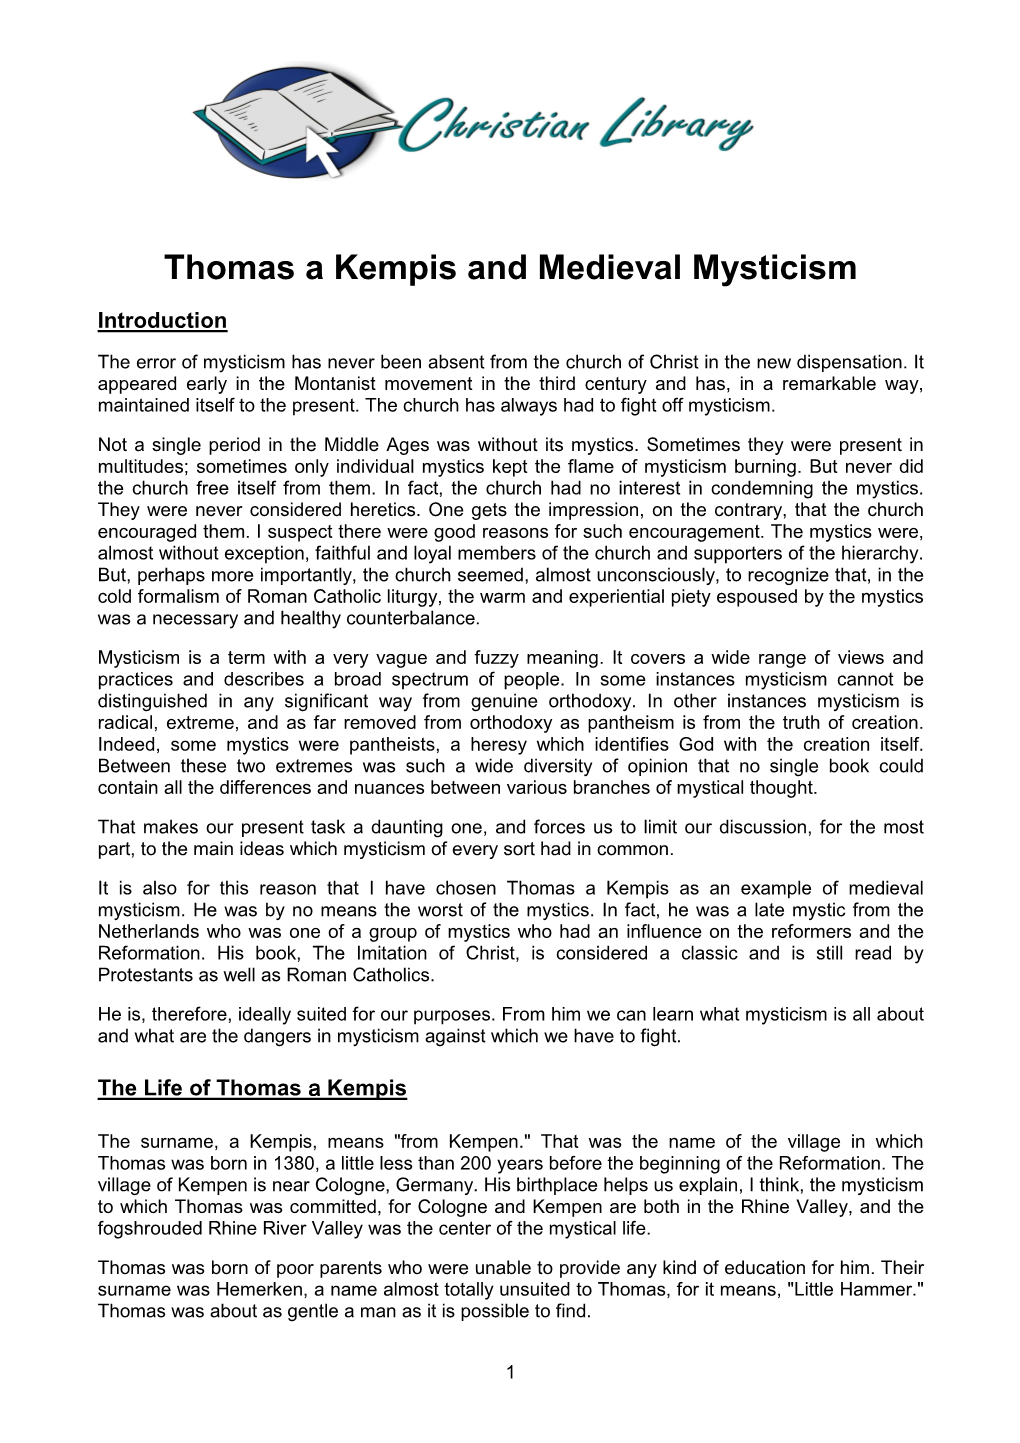 Thomas a Kempis and Medieval Mysticism